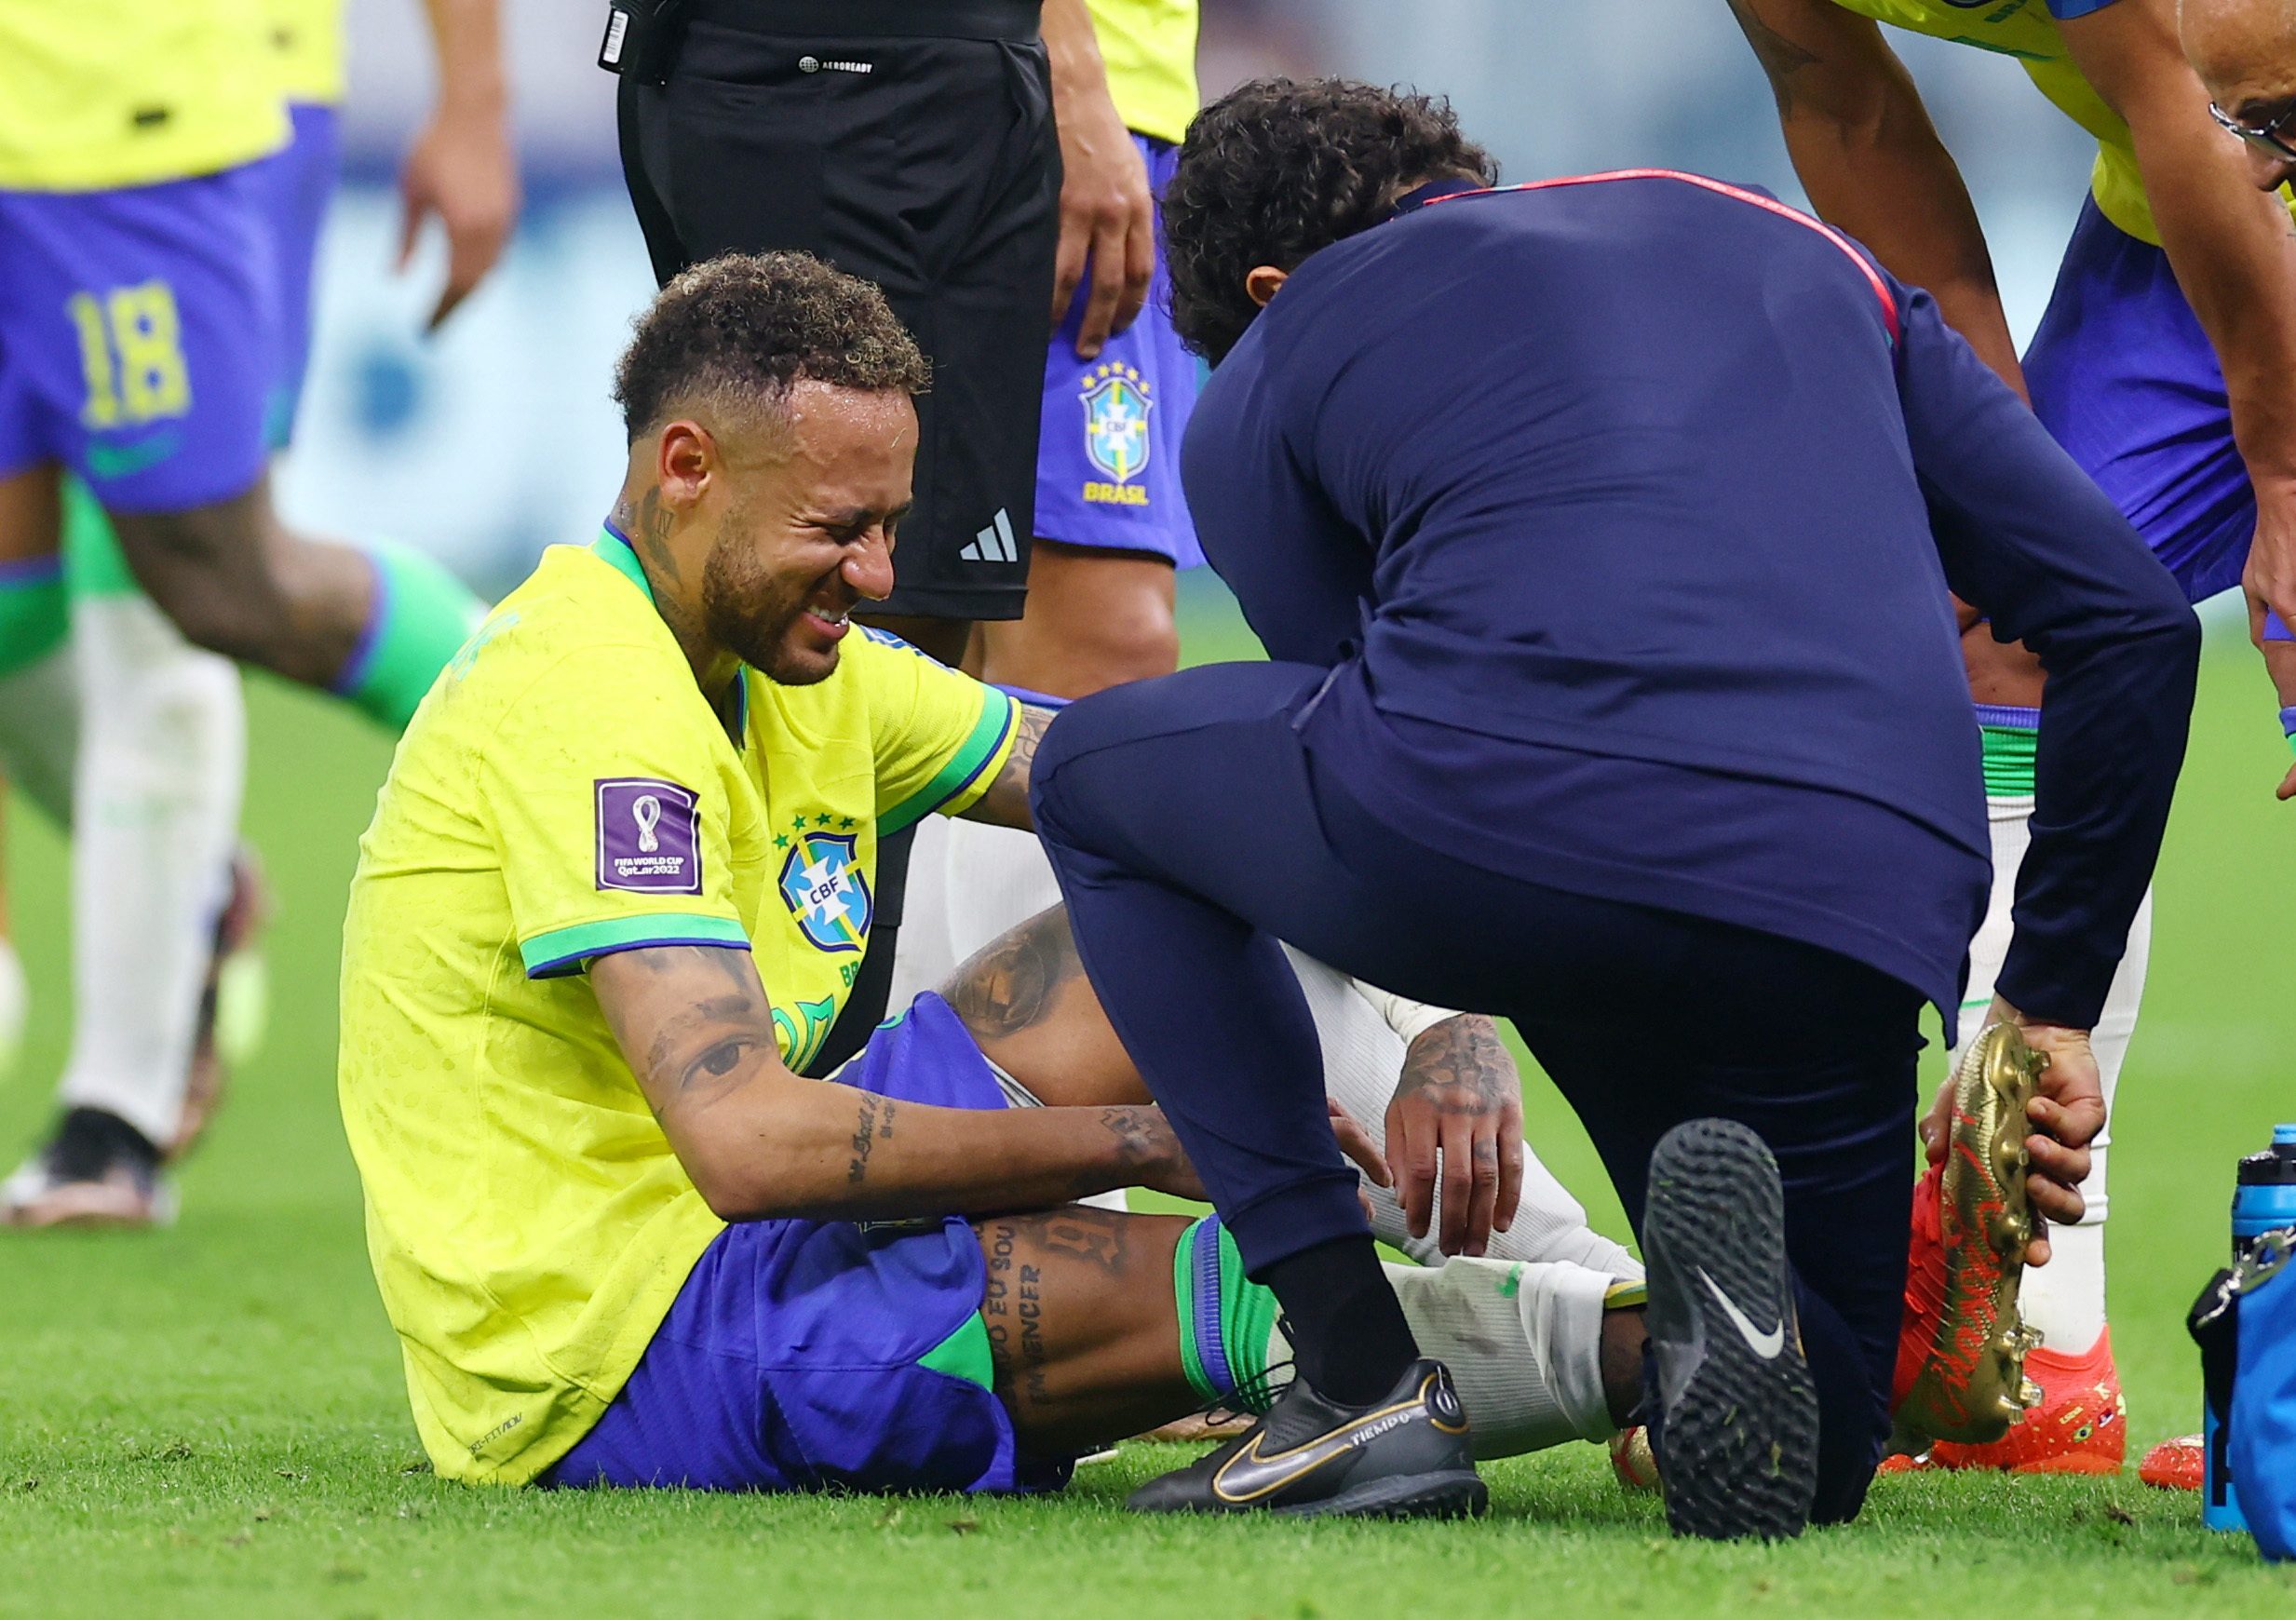 Neymar, Brazil's Star Player, Out With an Injury - The New York Times